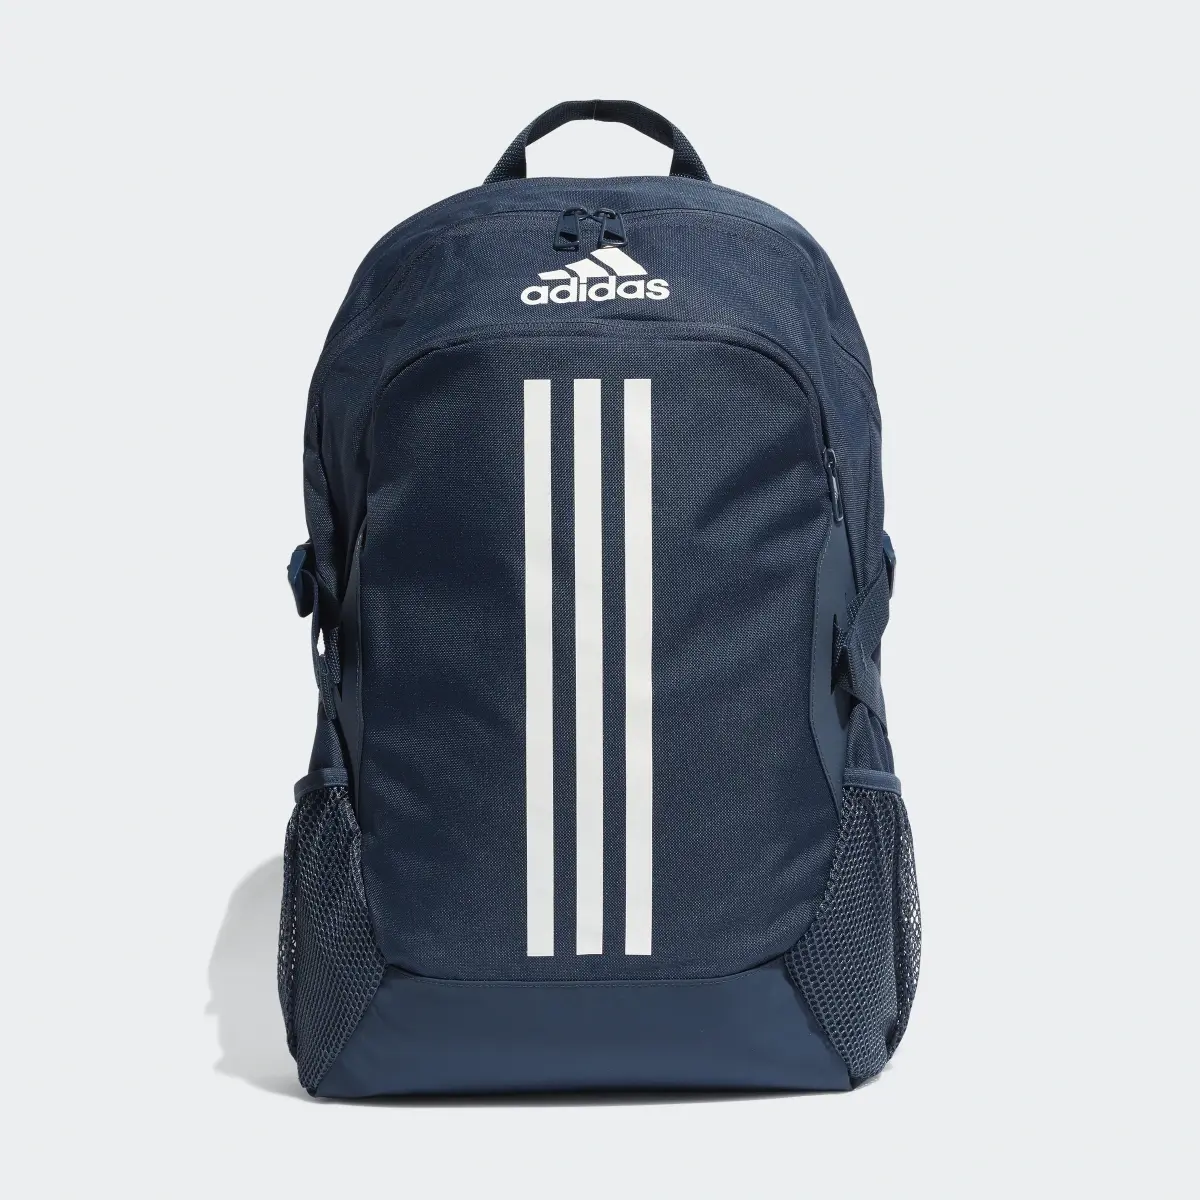 Adidas Power 5 Backpack. 2